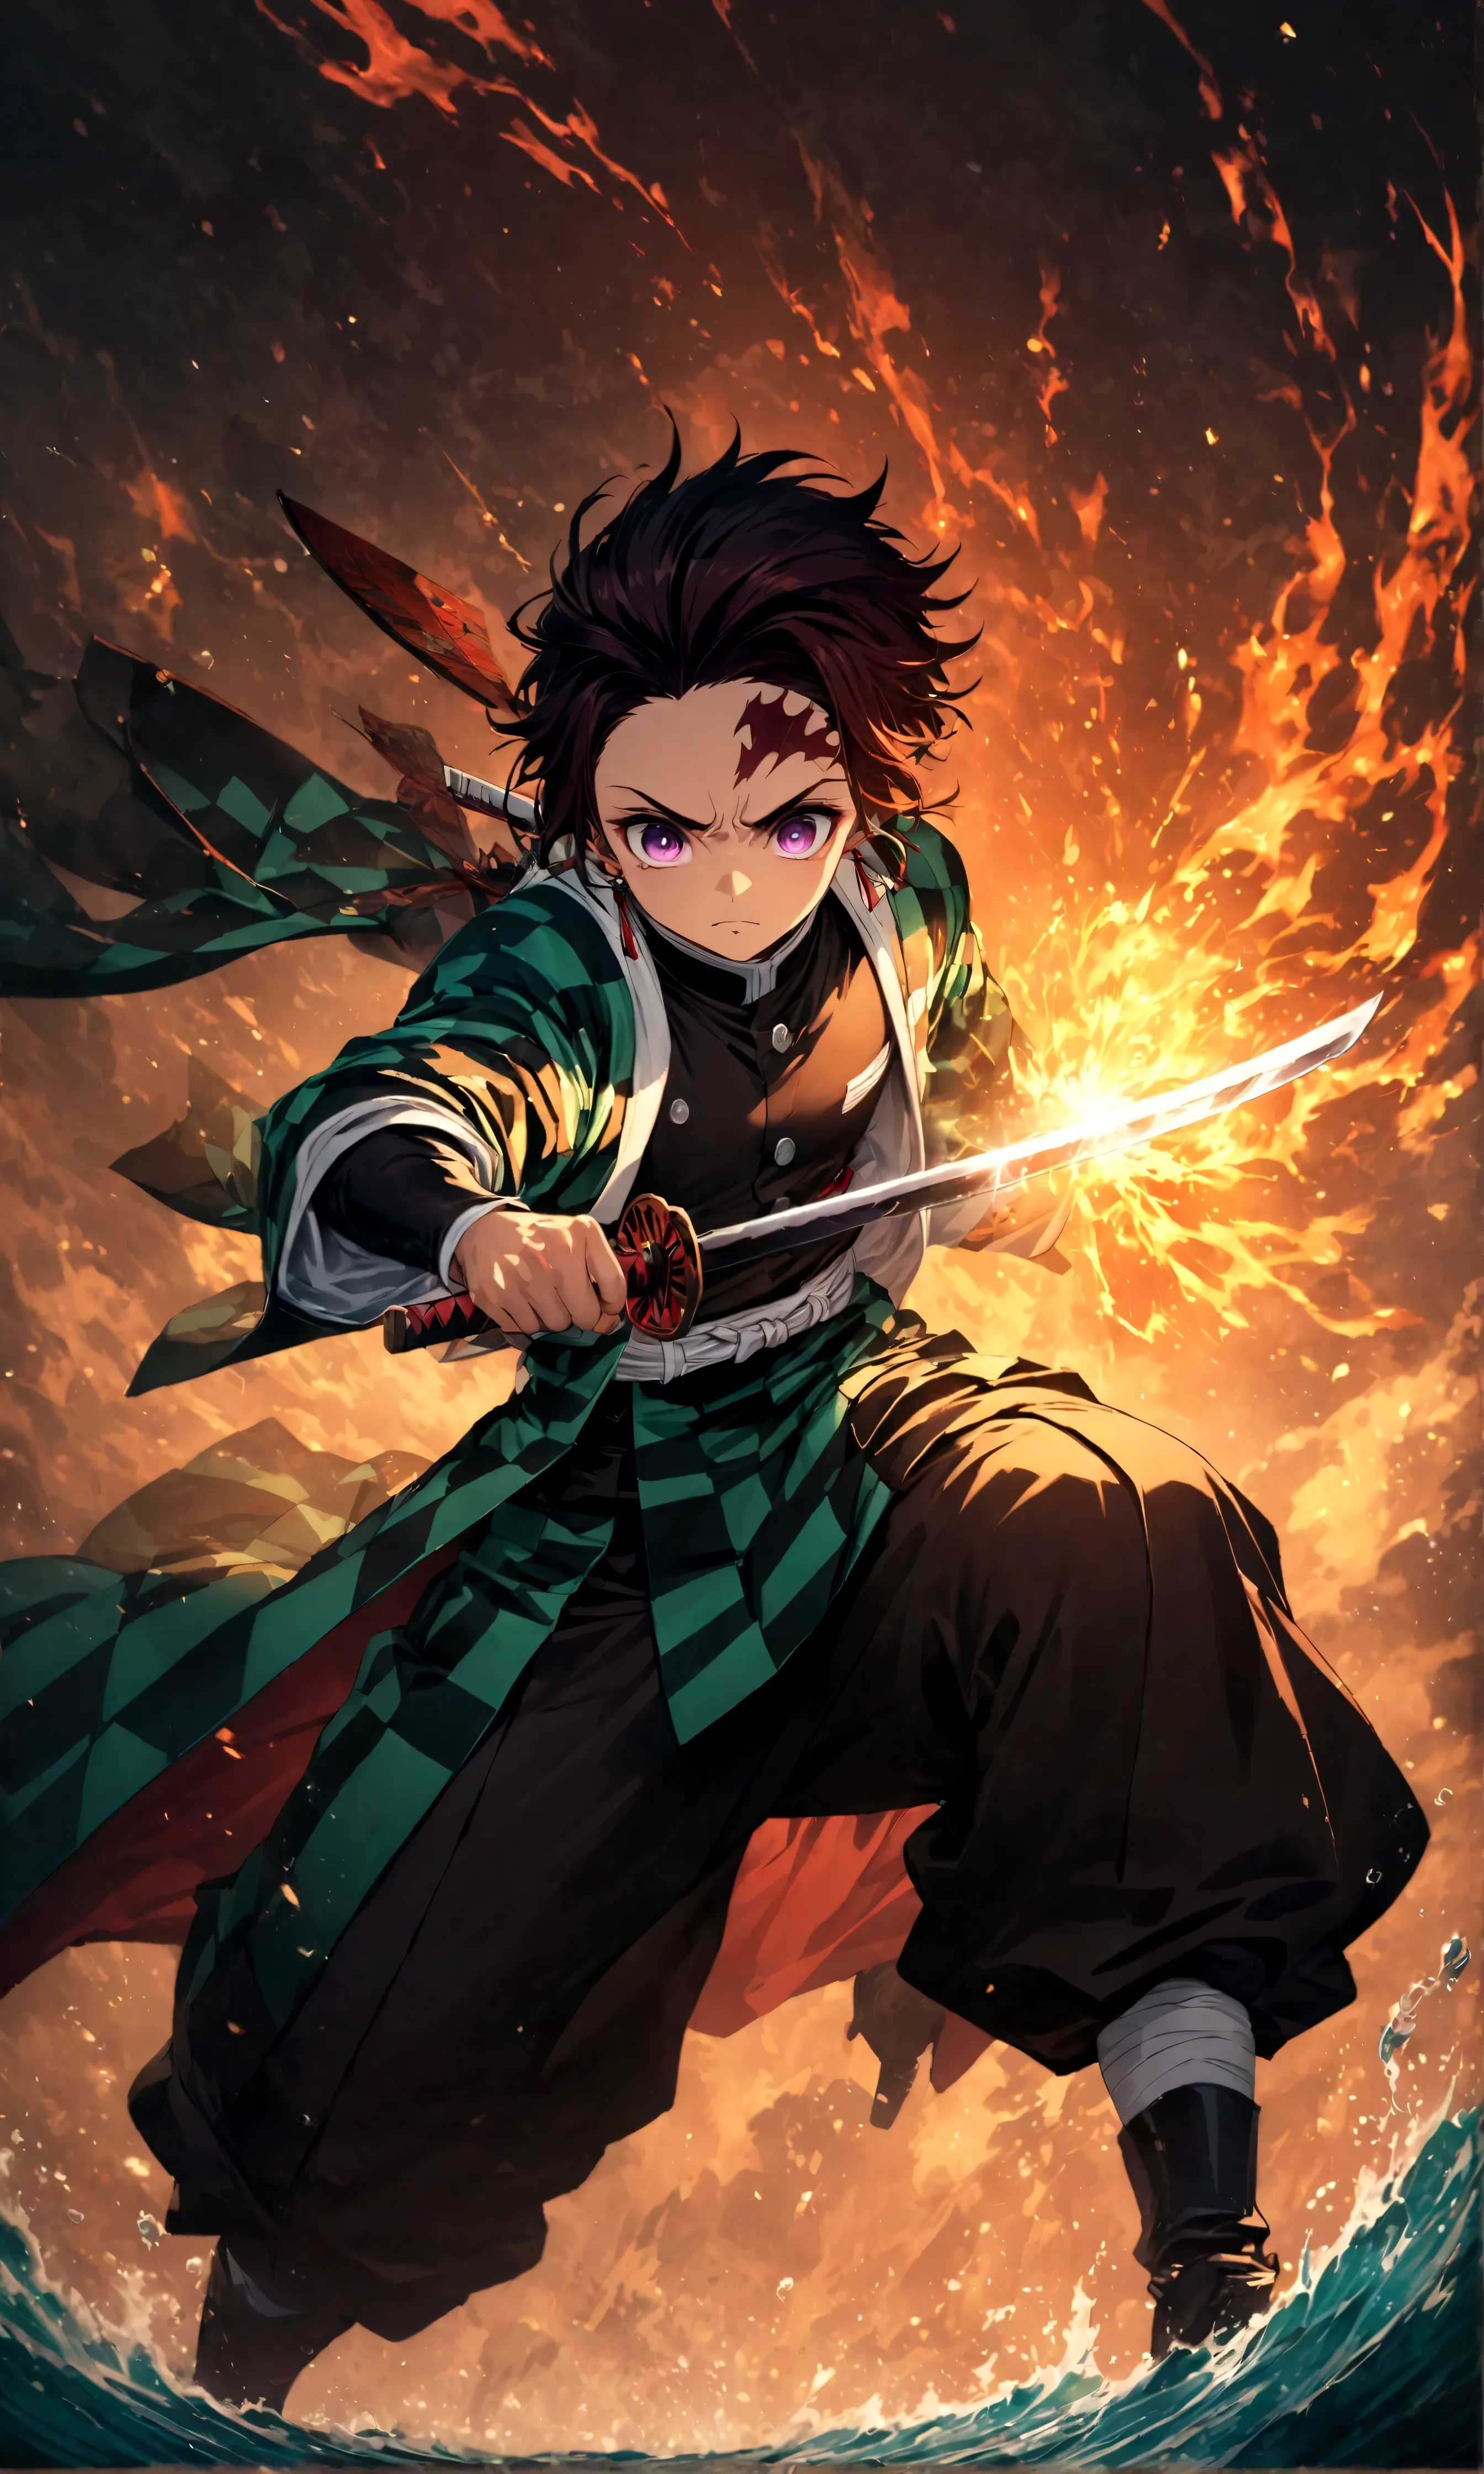 (1 male,Tanjiro Kamado),Demon slayer,Tanjiro&#39;s Costume,Holding a Japanese sword,Water and fire effects,Intricate details,,De...